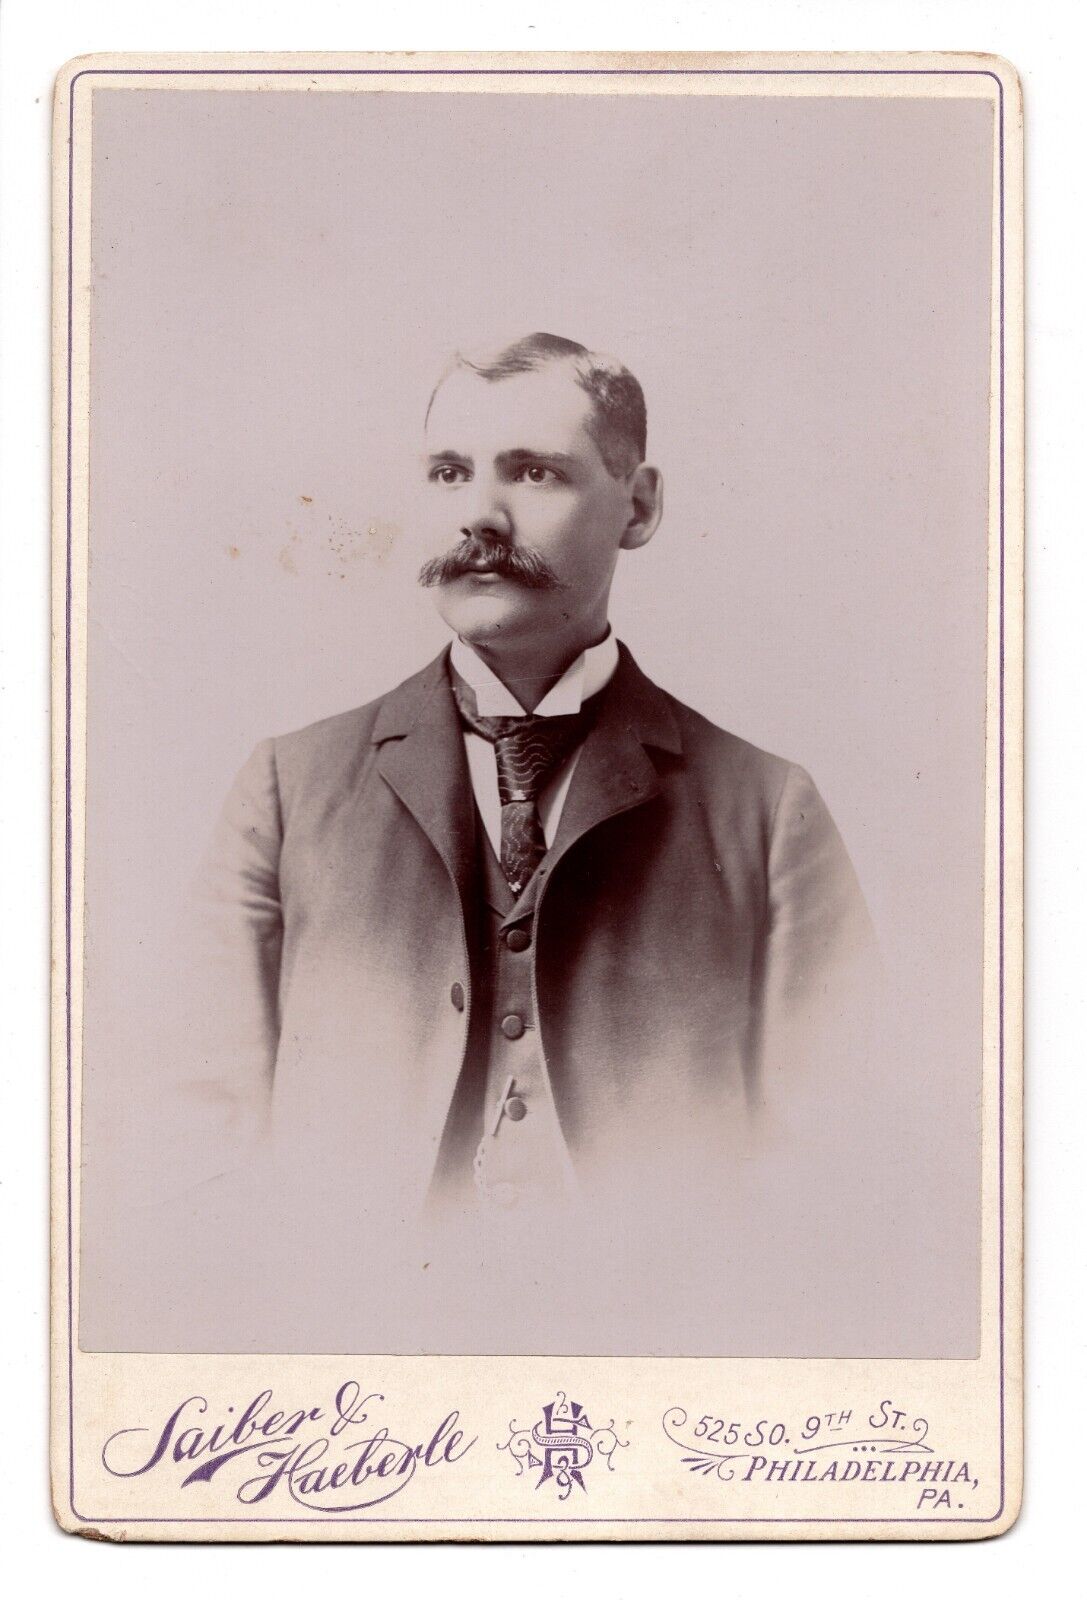 C. 1890s CABINET CARD SAIBER & HABERLE MAN IN SUIT WITH MUSTACHE PHILADEPLHIA PA